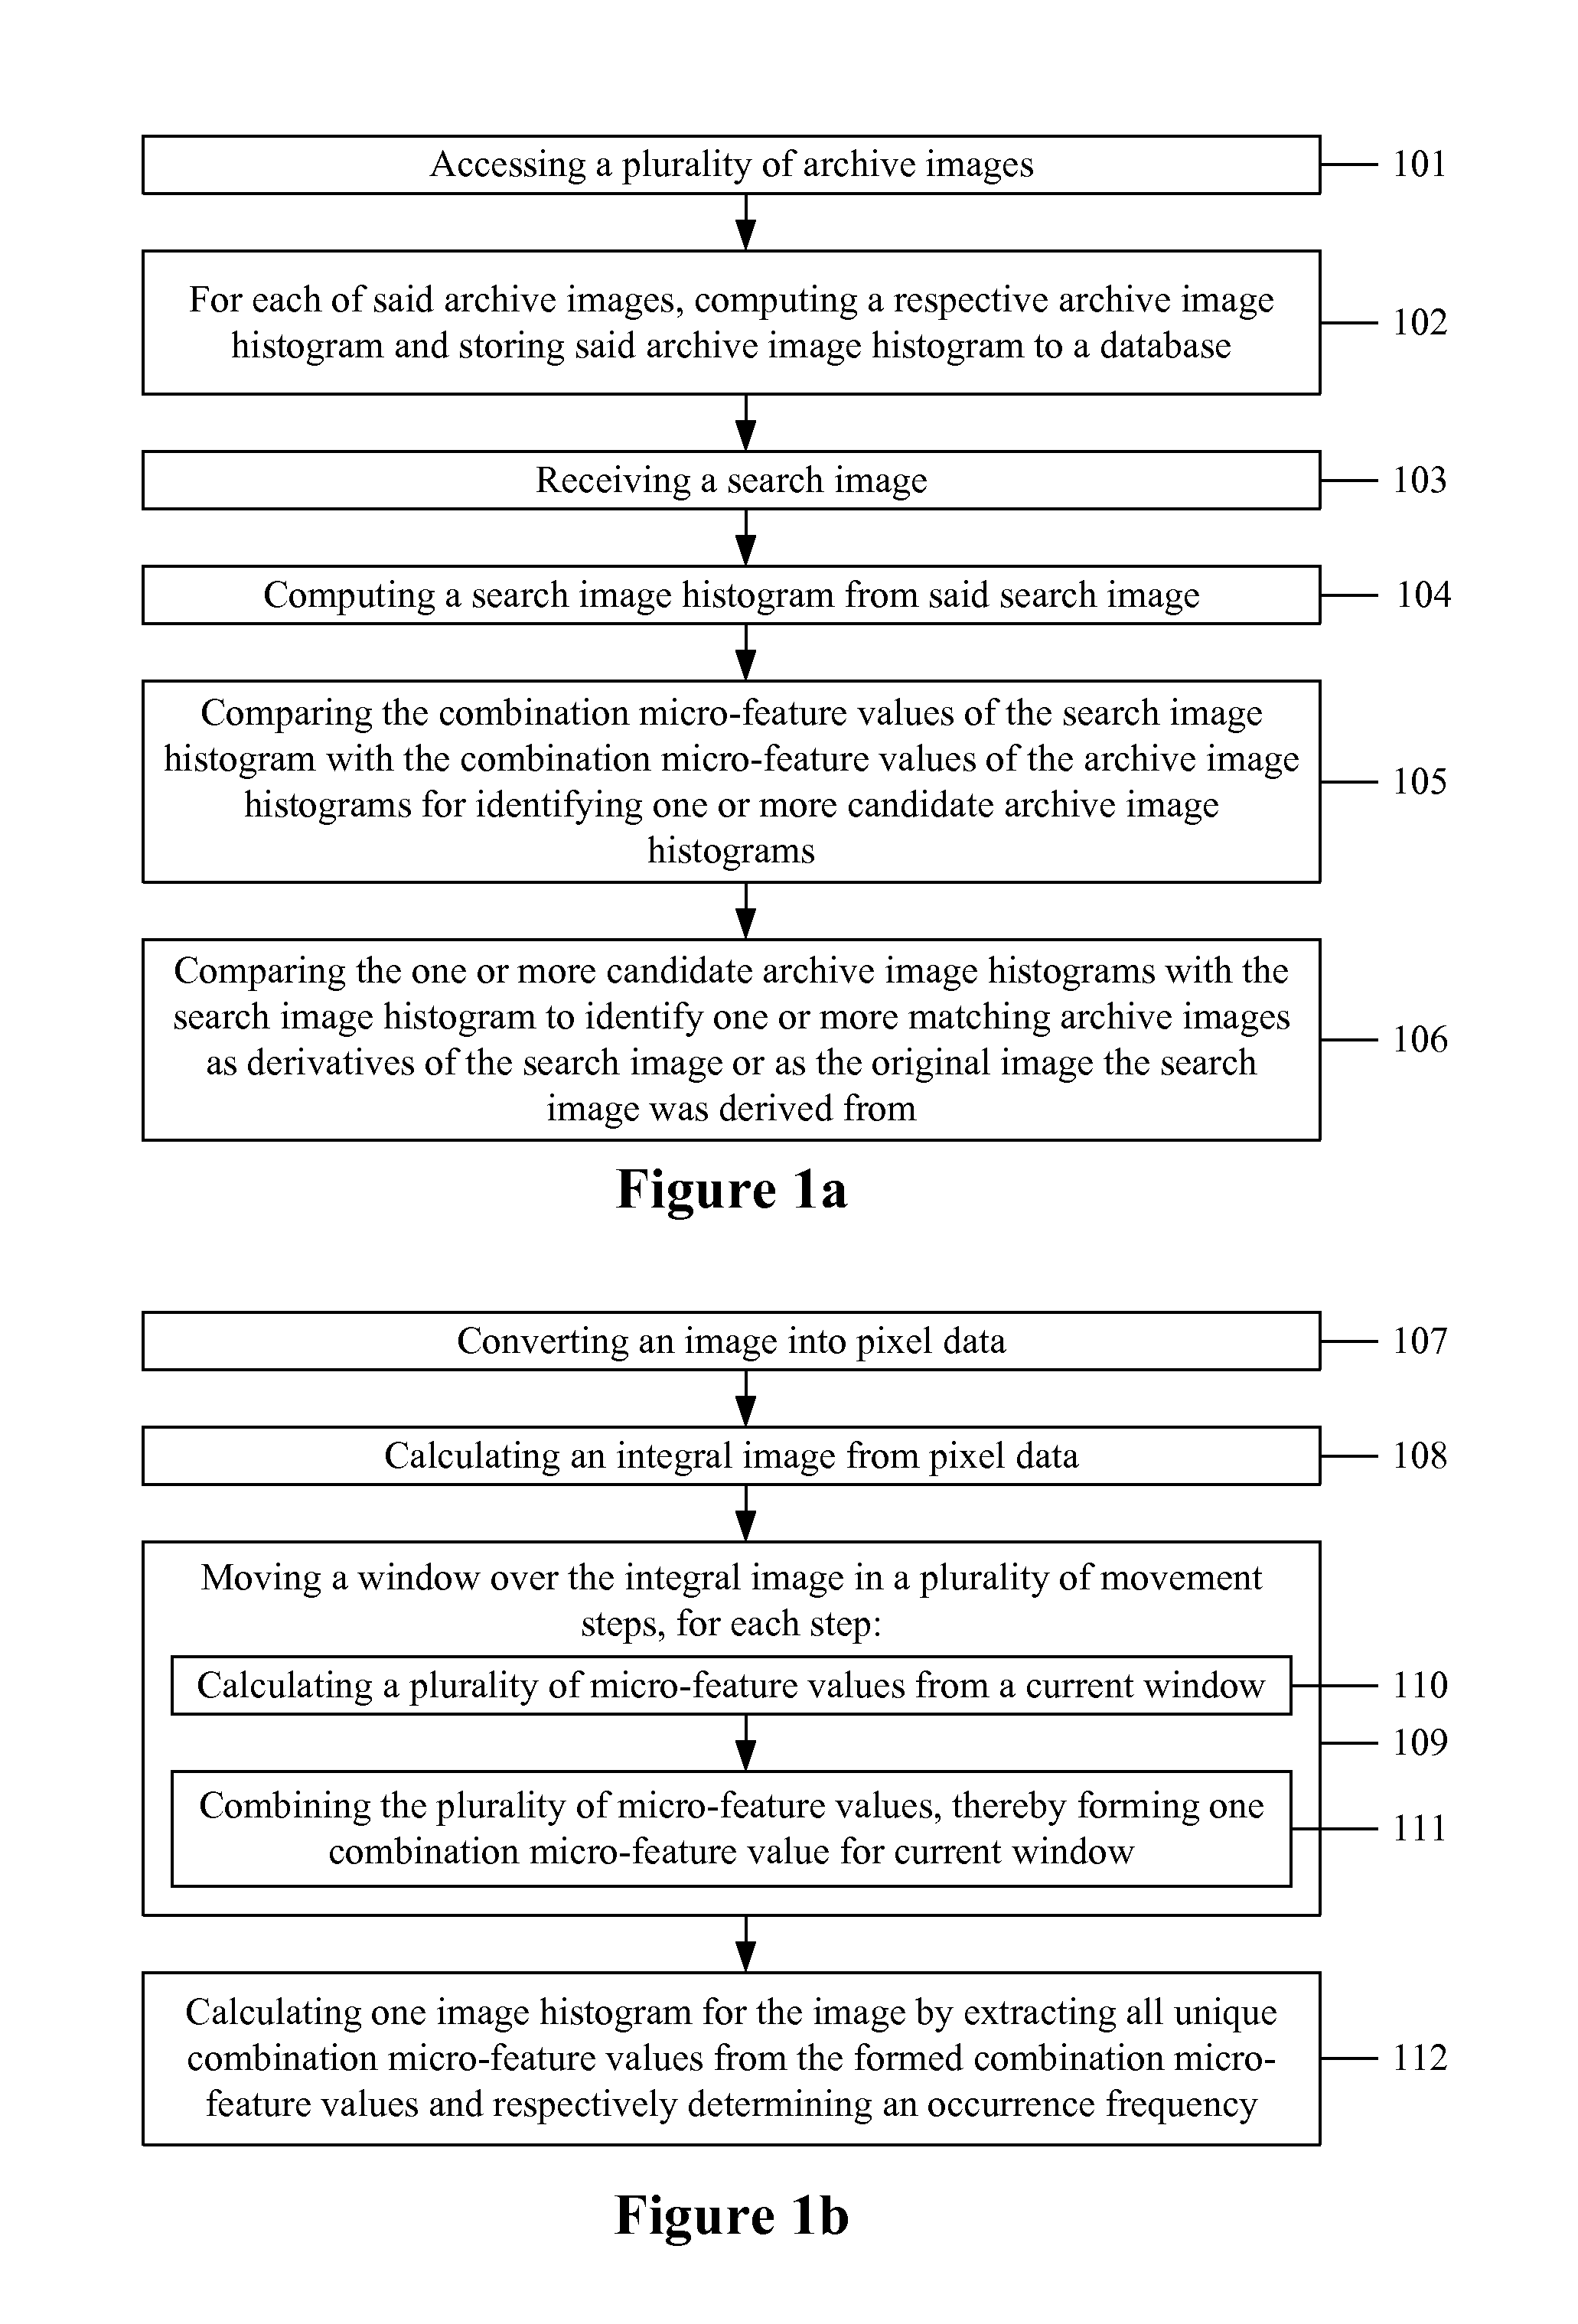 Method for identifying pairs of derivative and original images